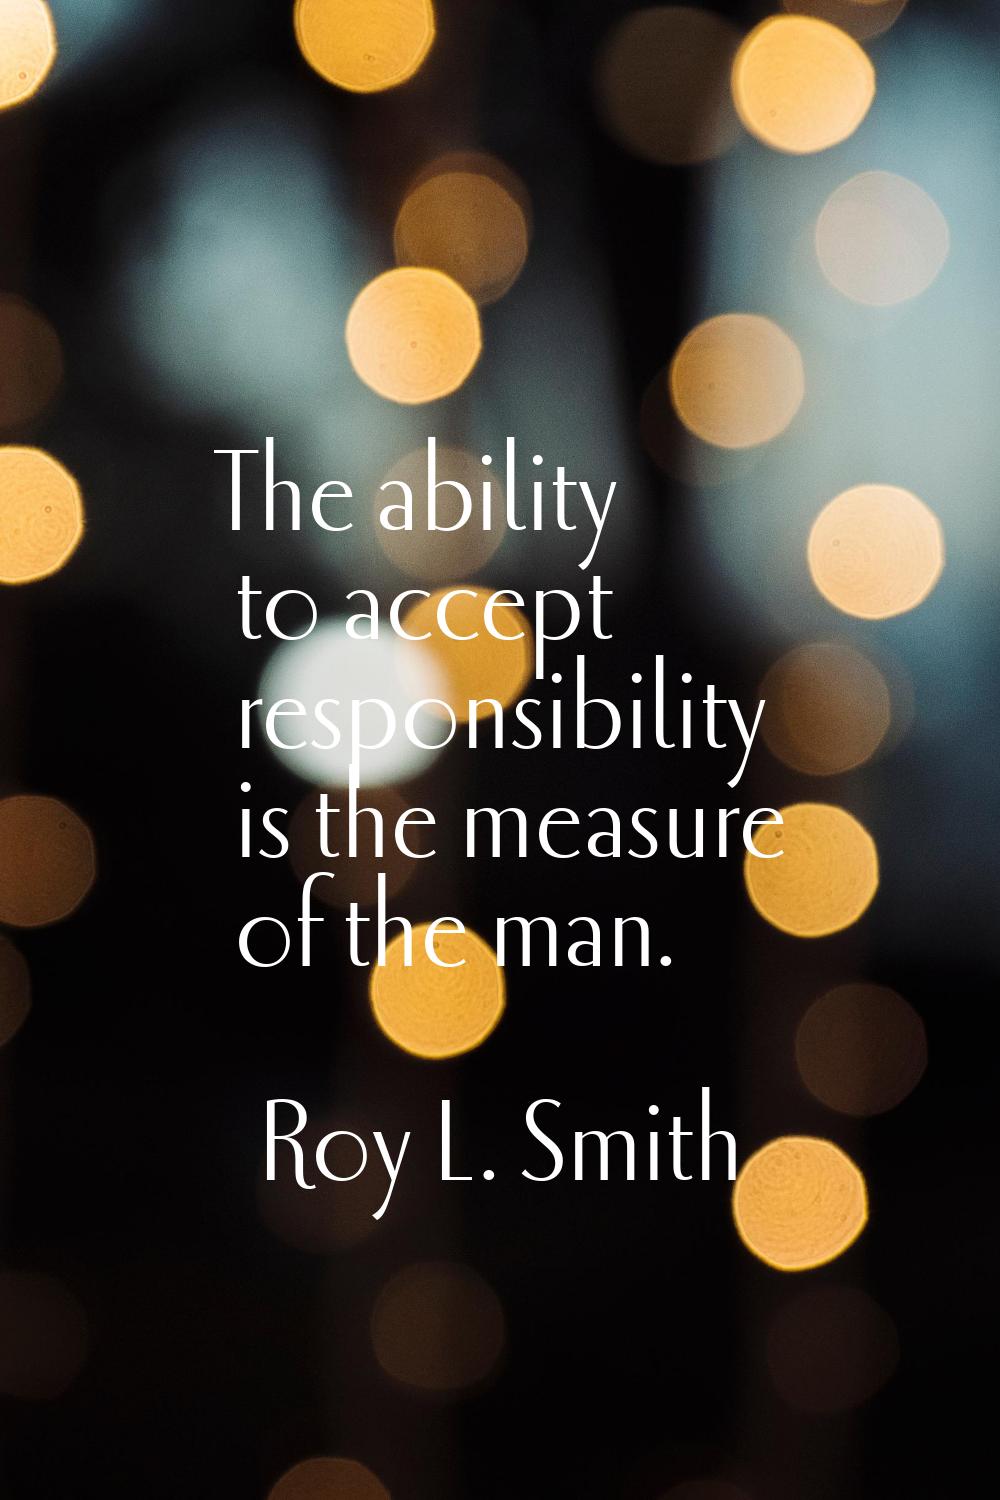 The ability to accept responsibility is the measure of the man.